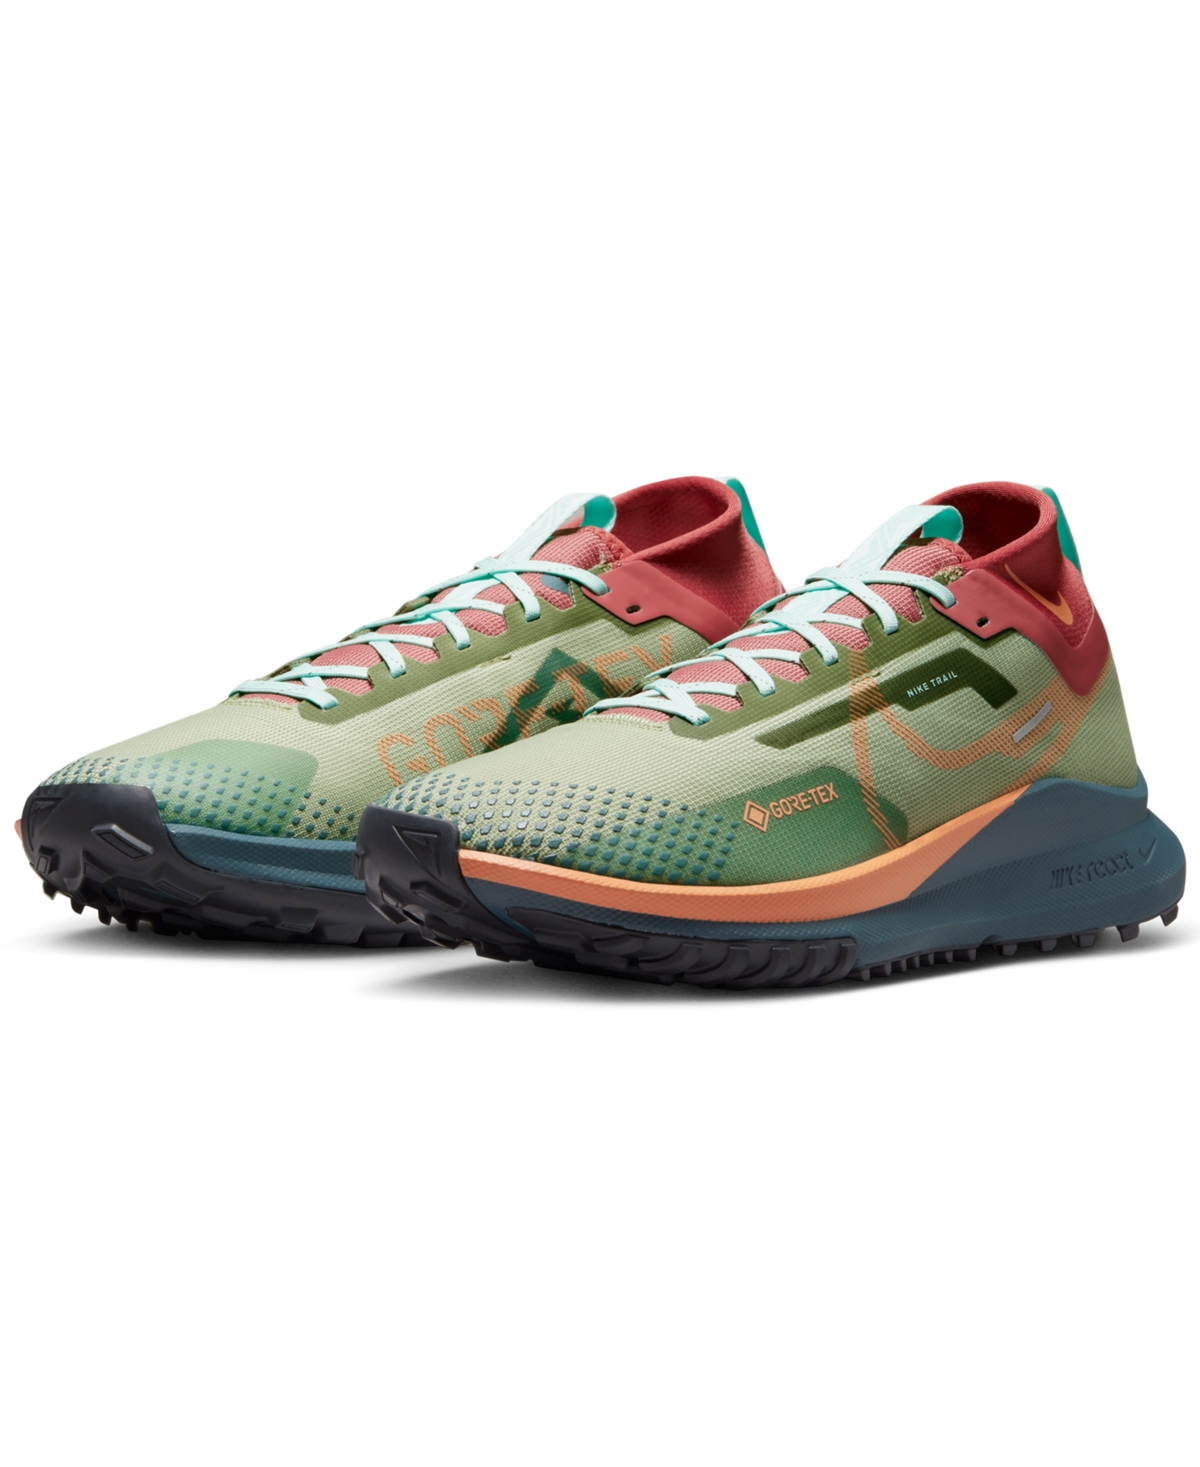 NIKE MEN'S REACT PEGASUS TRAIL 4 GORE-TEX WATER RESISTANT TRAIL RUNNING SNEAKERS FROM FINISH LINE